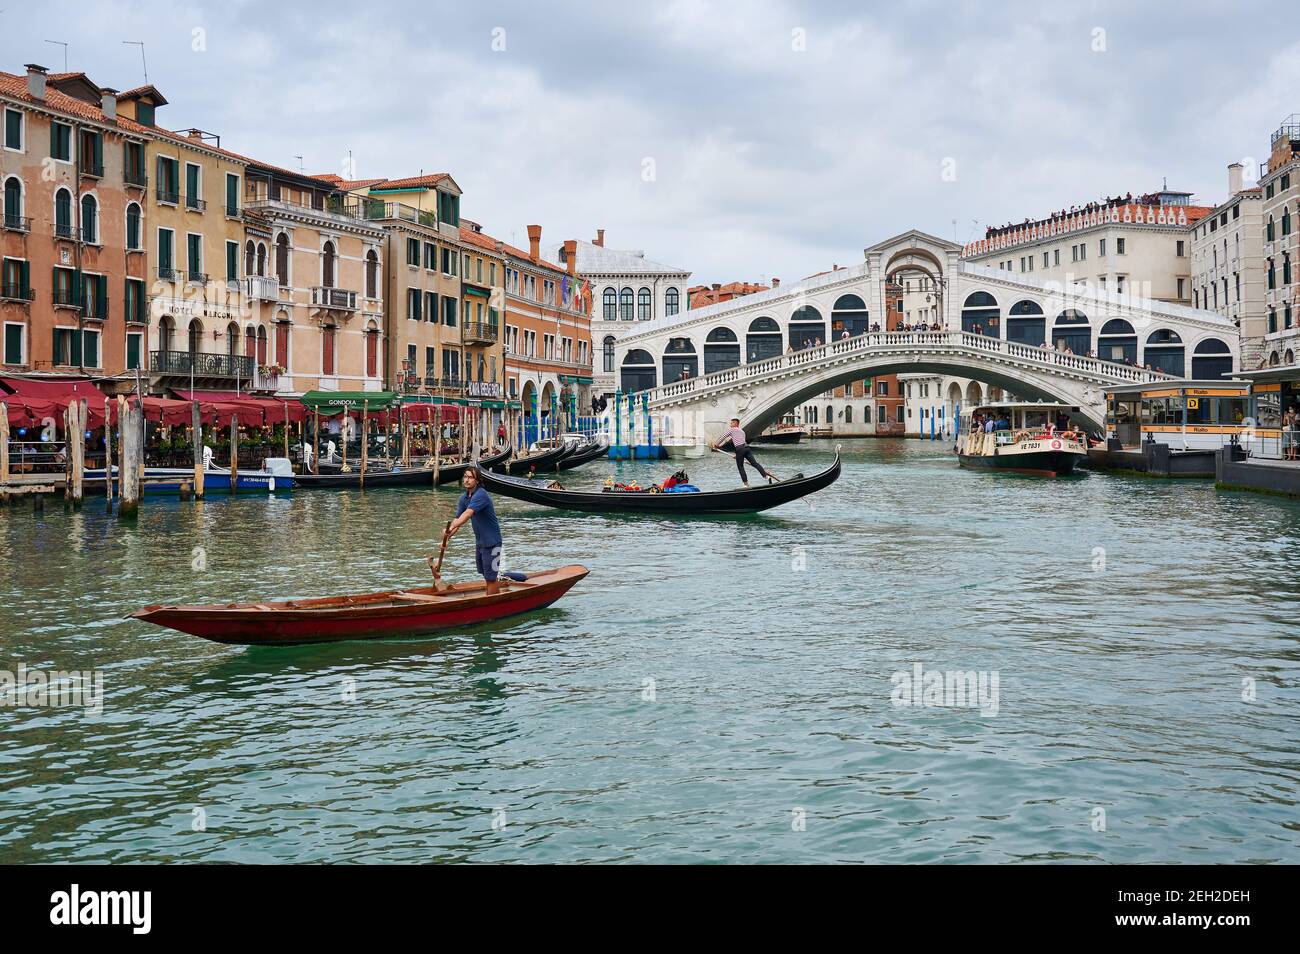 gondolas in front of typical Venetian house facades on the Grand Canal and Rialto bridge in the back, Venice, Veneto, Italy Stock Photo